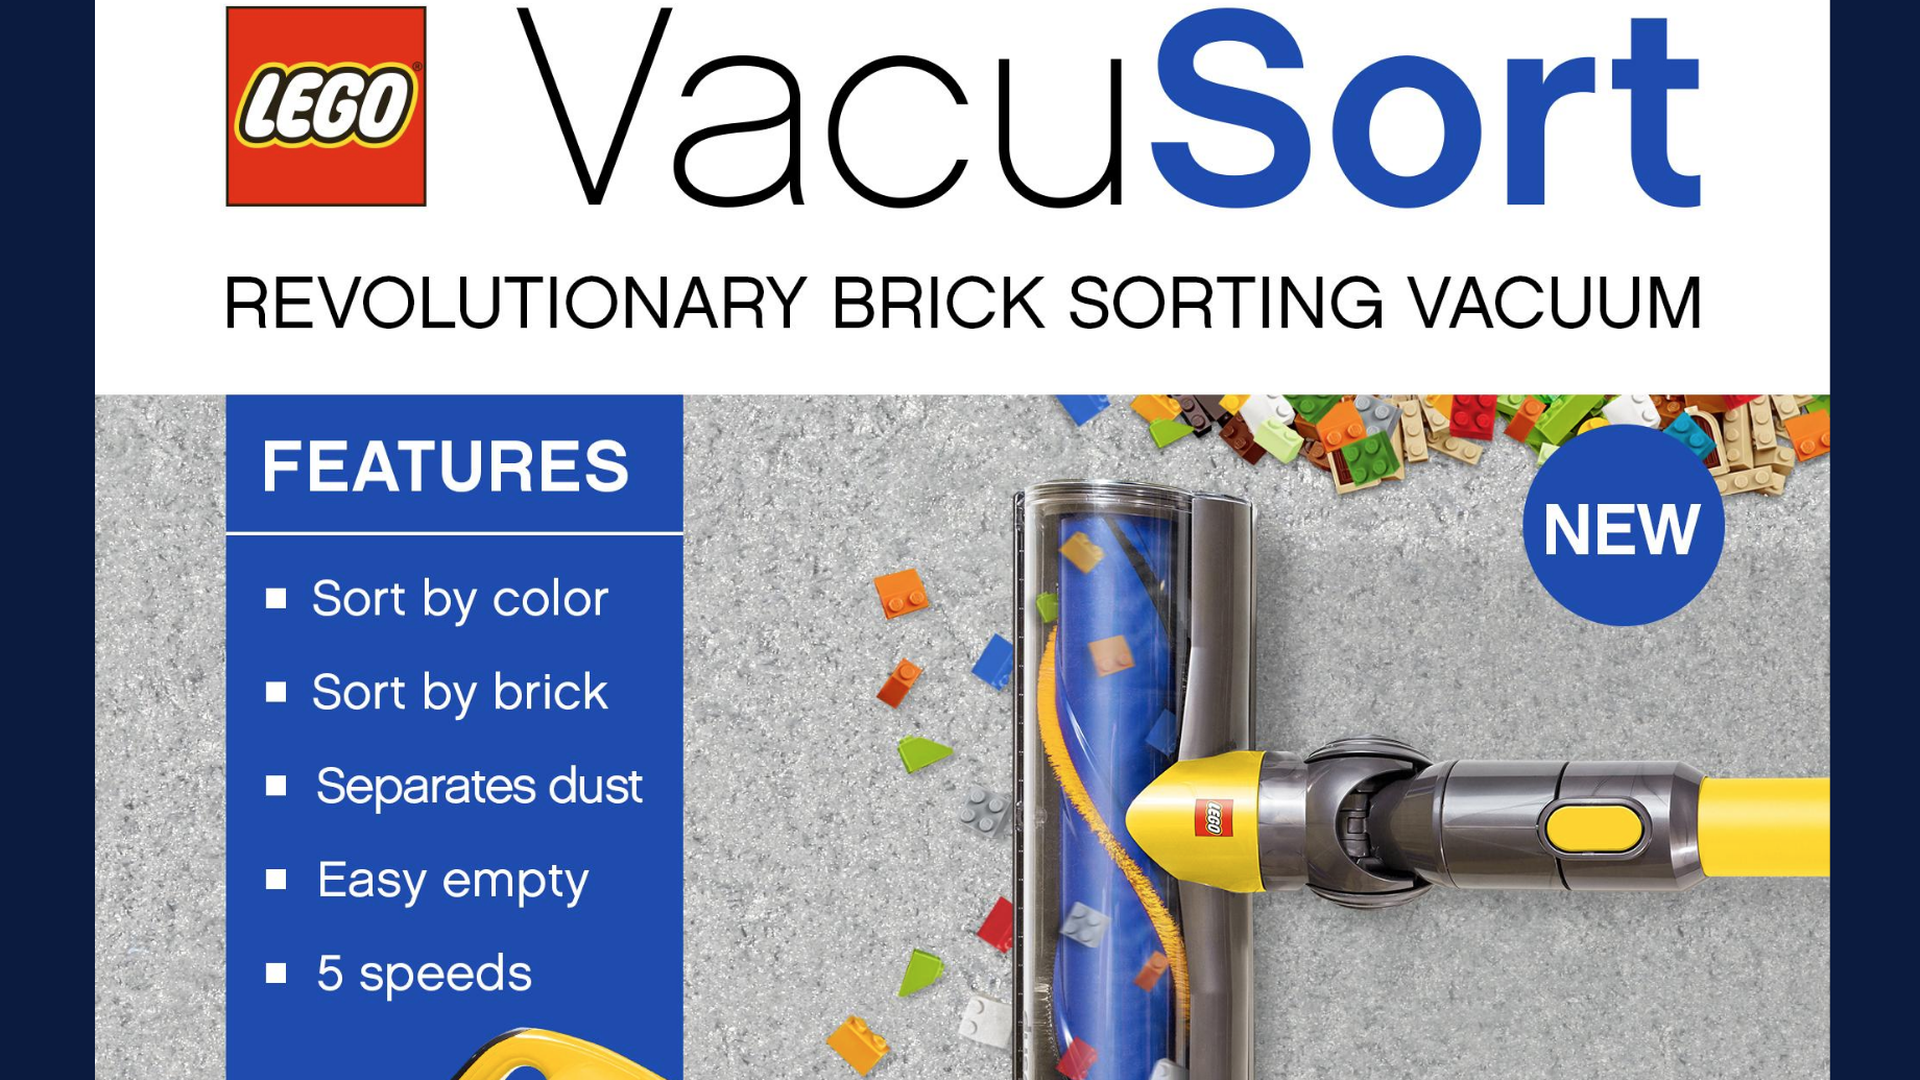 Lego's April Fools' Day tweet was for a vacuum that can suck up and sort plastic bricks